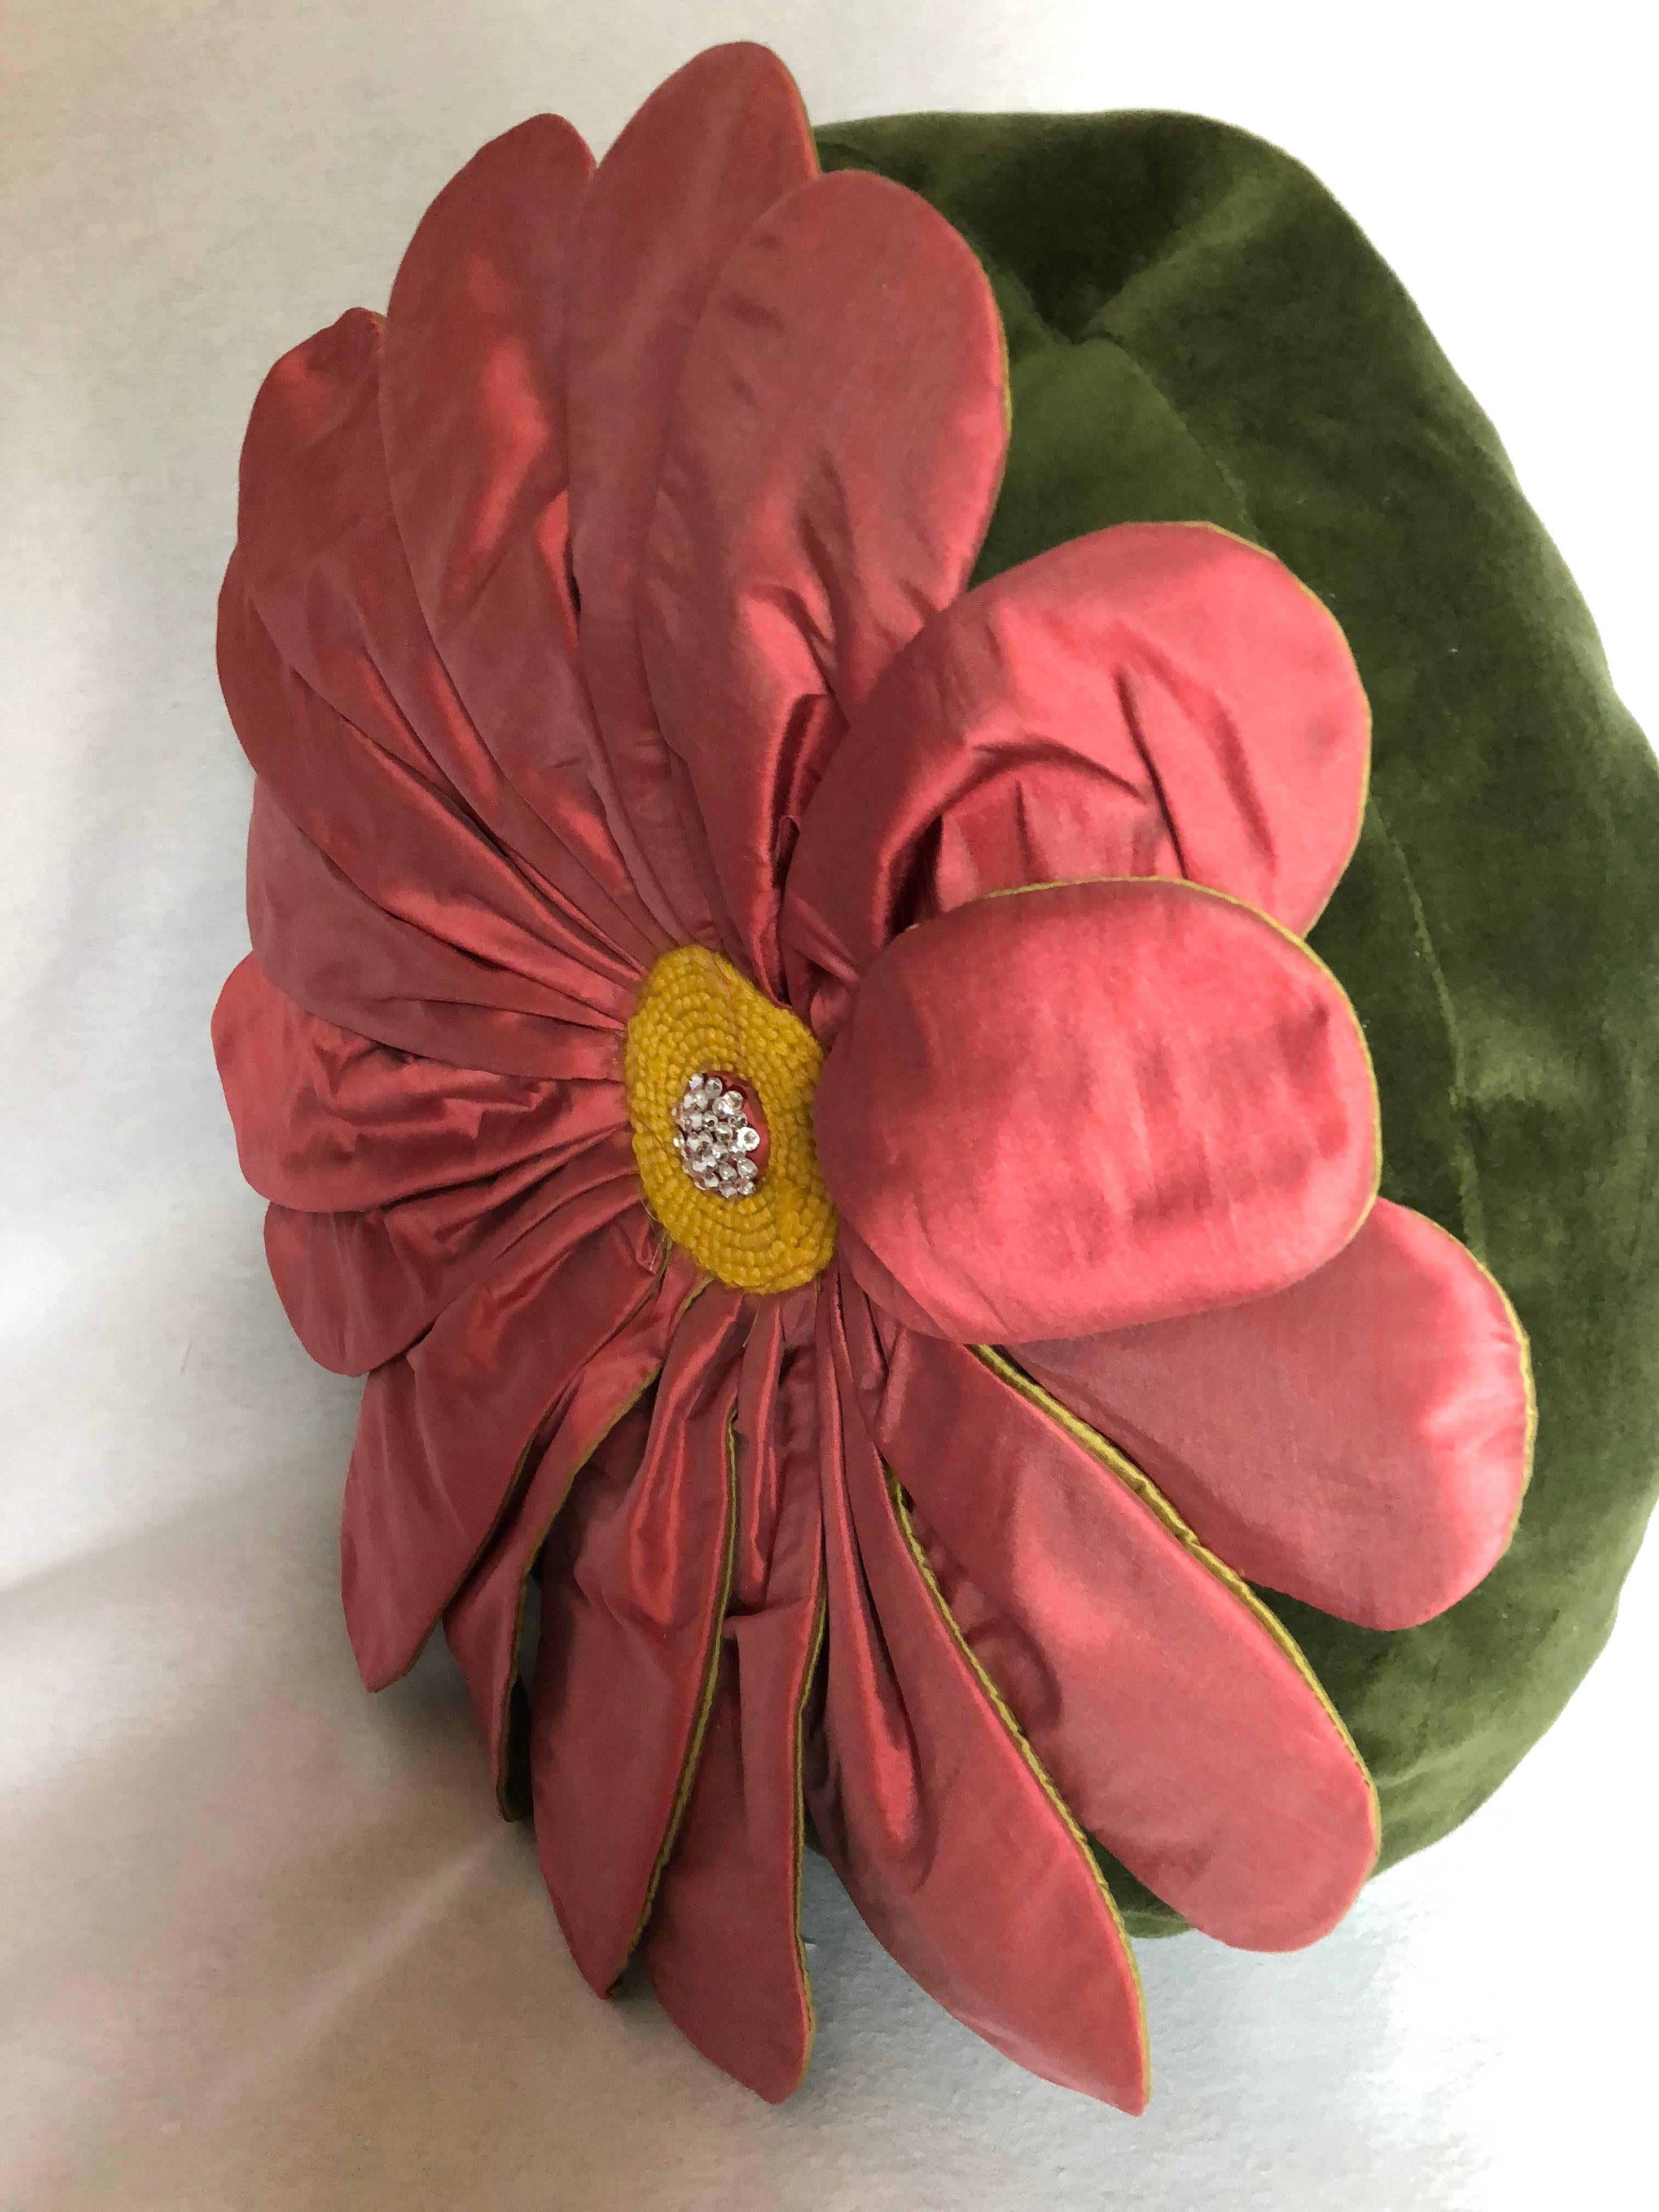 This pillow is another original design from Gantt Design Studio. Each pillow is made by hand in my studio. The Pink Gerber Daisy pillow is made of Yellow silk and Forest Green Velvet. Each silk petal is individually wired to hold its shape and allow